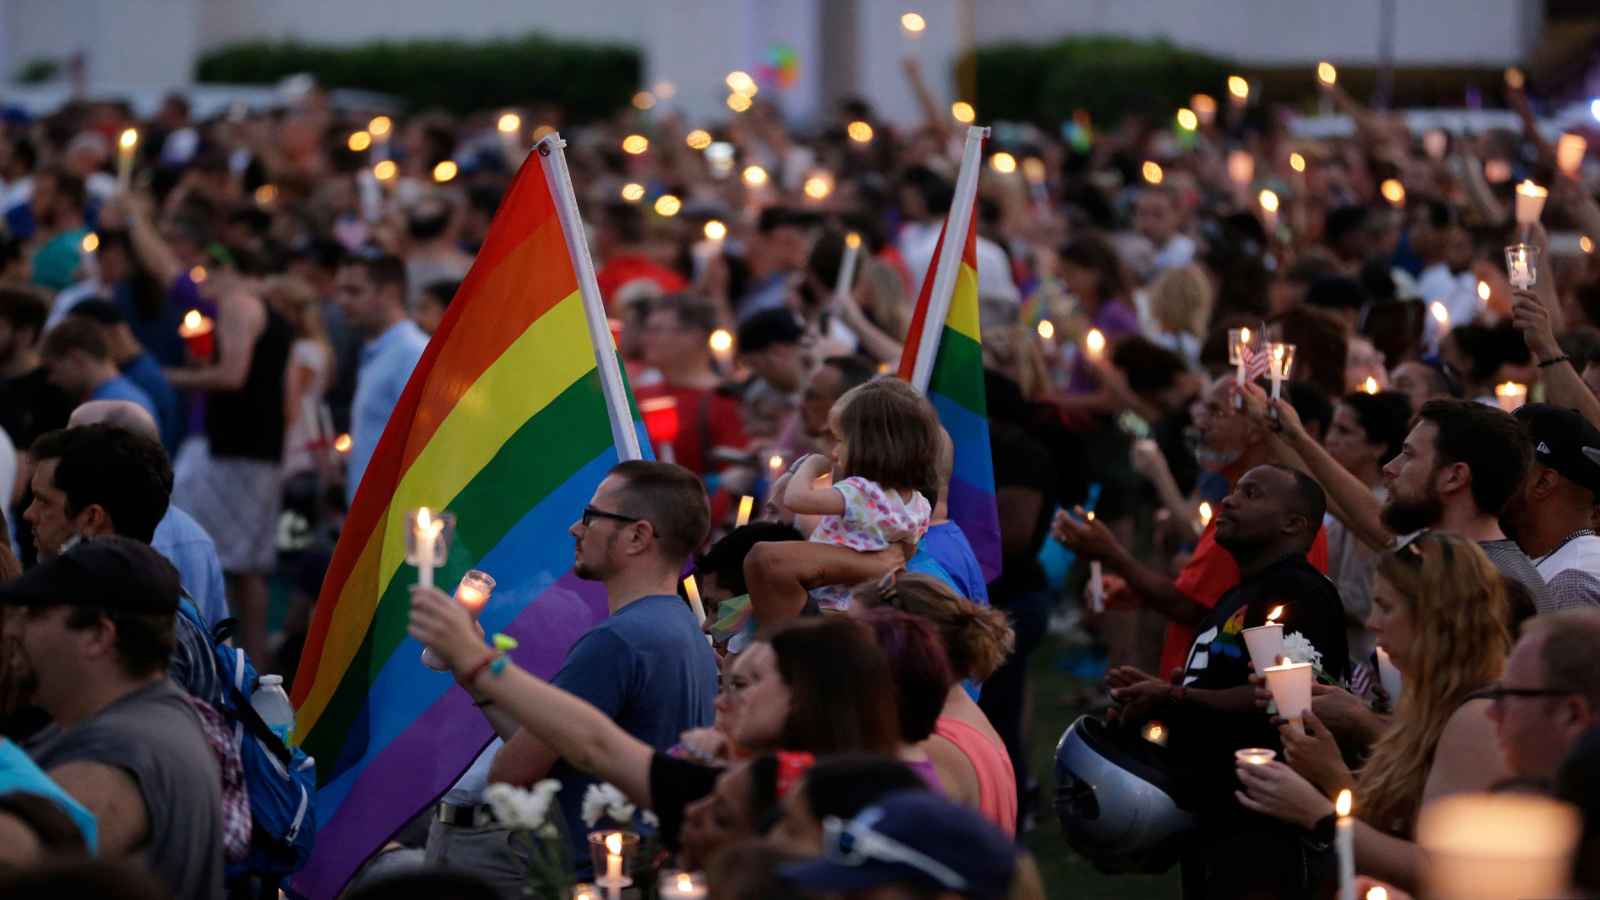 Pulse Night of Remembrance 2023: Date, History, Facts about LGBTQ